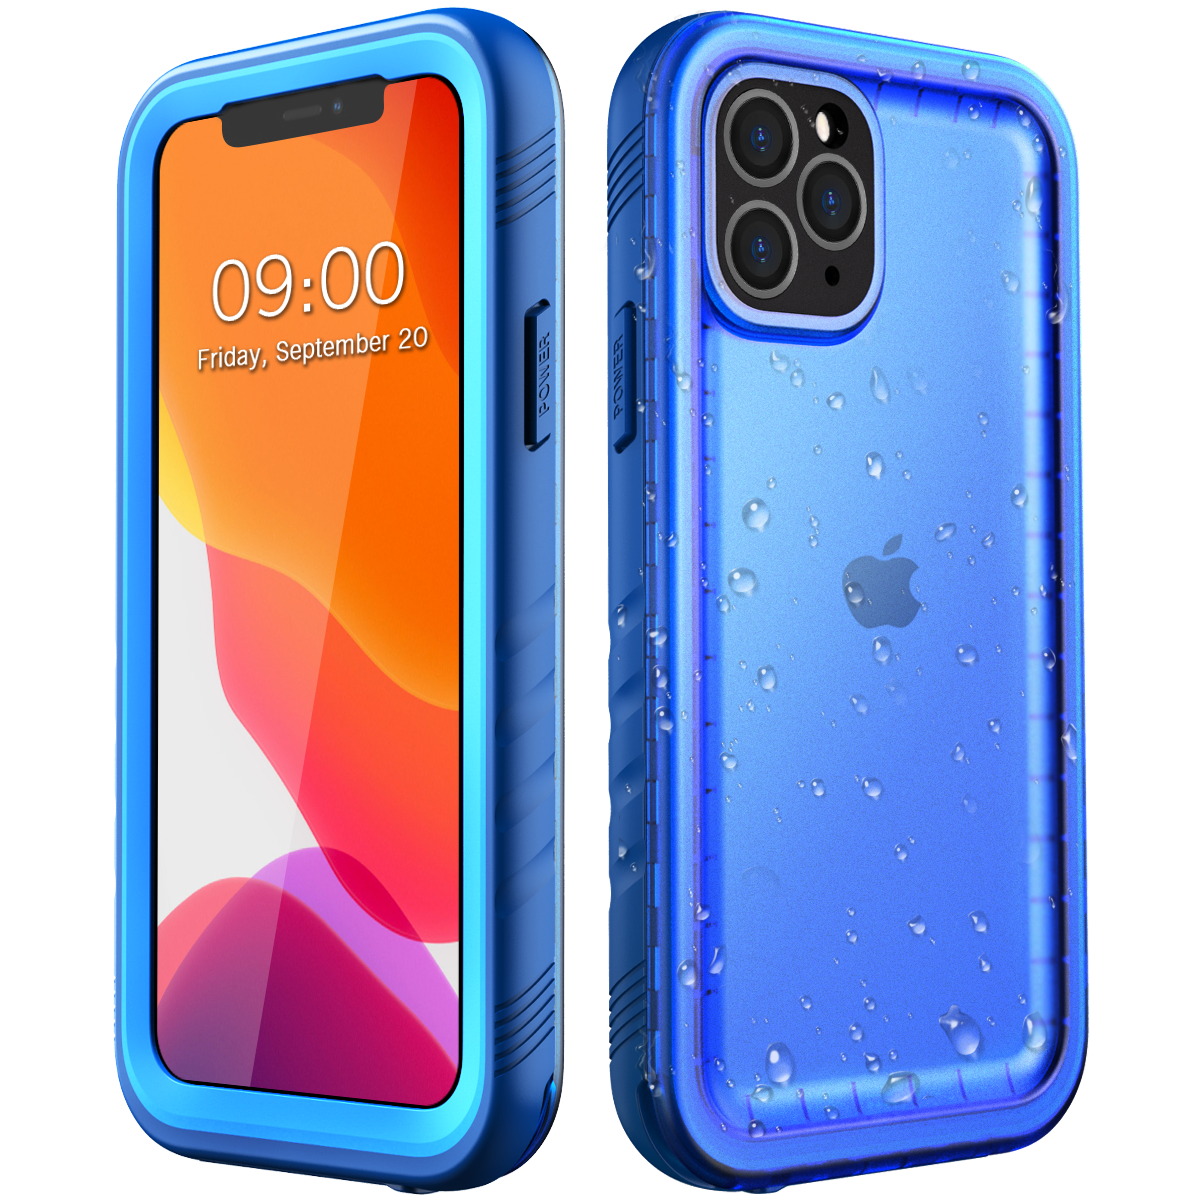 SPORTLINK Waterproof Case for iPhone 11, Full Body Heavy Duty Protection  Full Sealed Cover Shockproof Dustproof Built-in Clear Screen Protector  Rugged